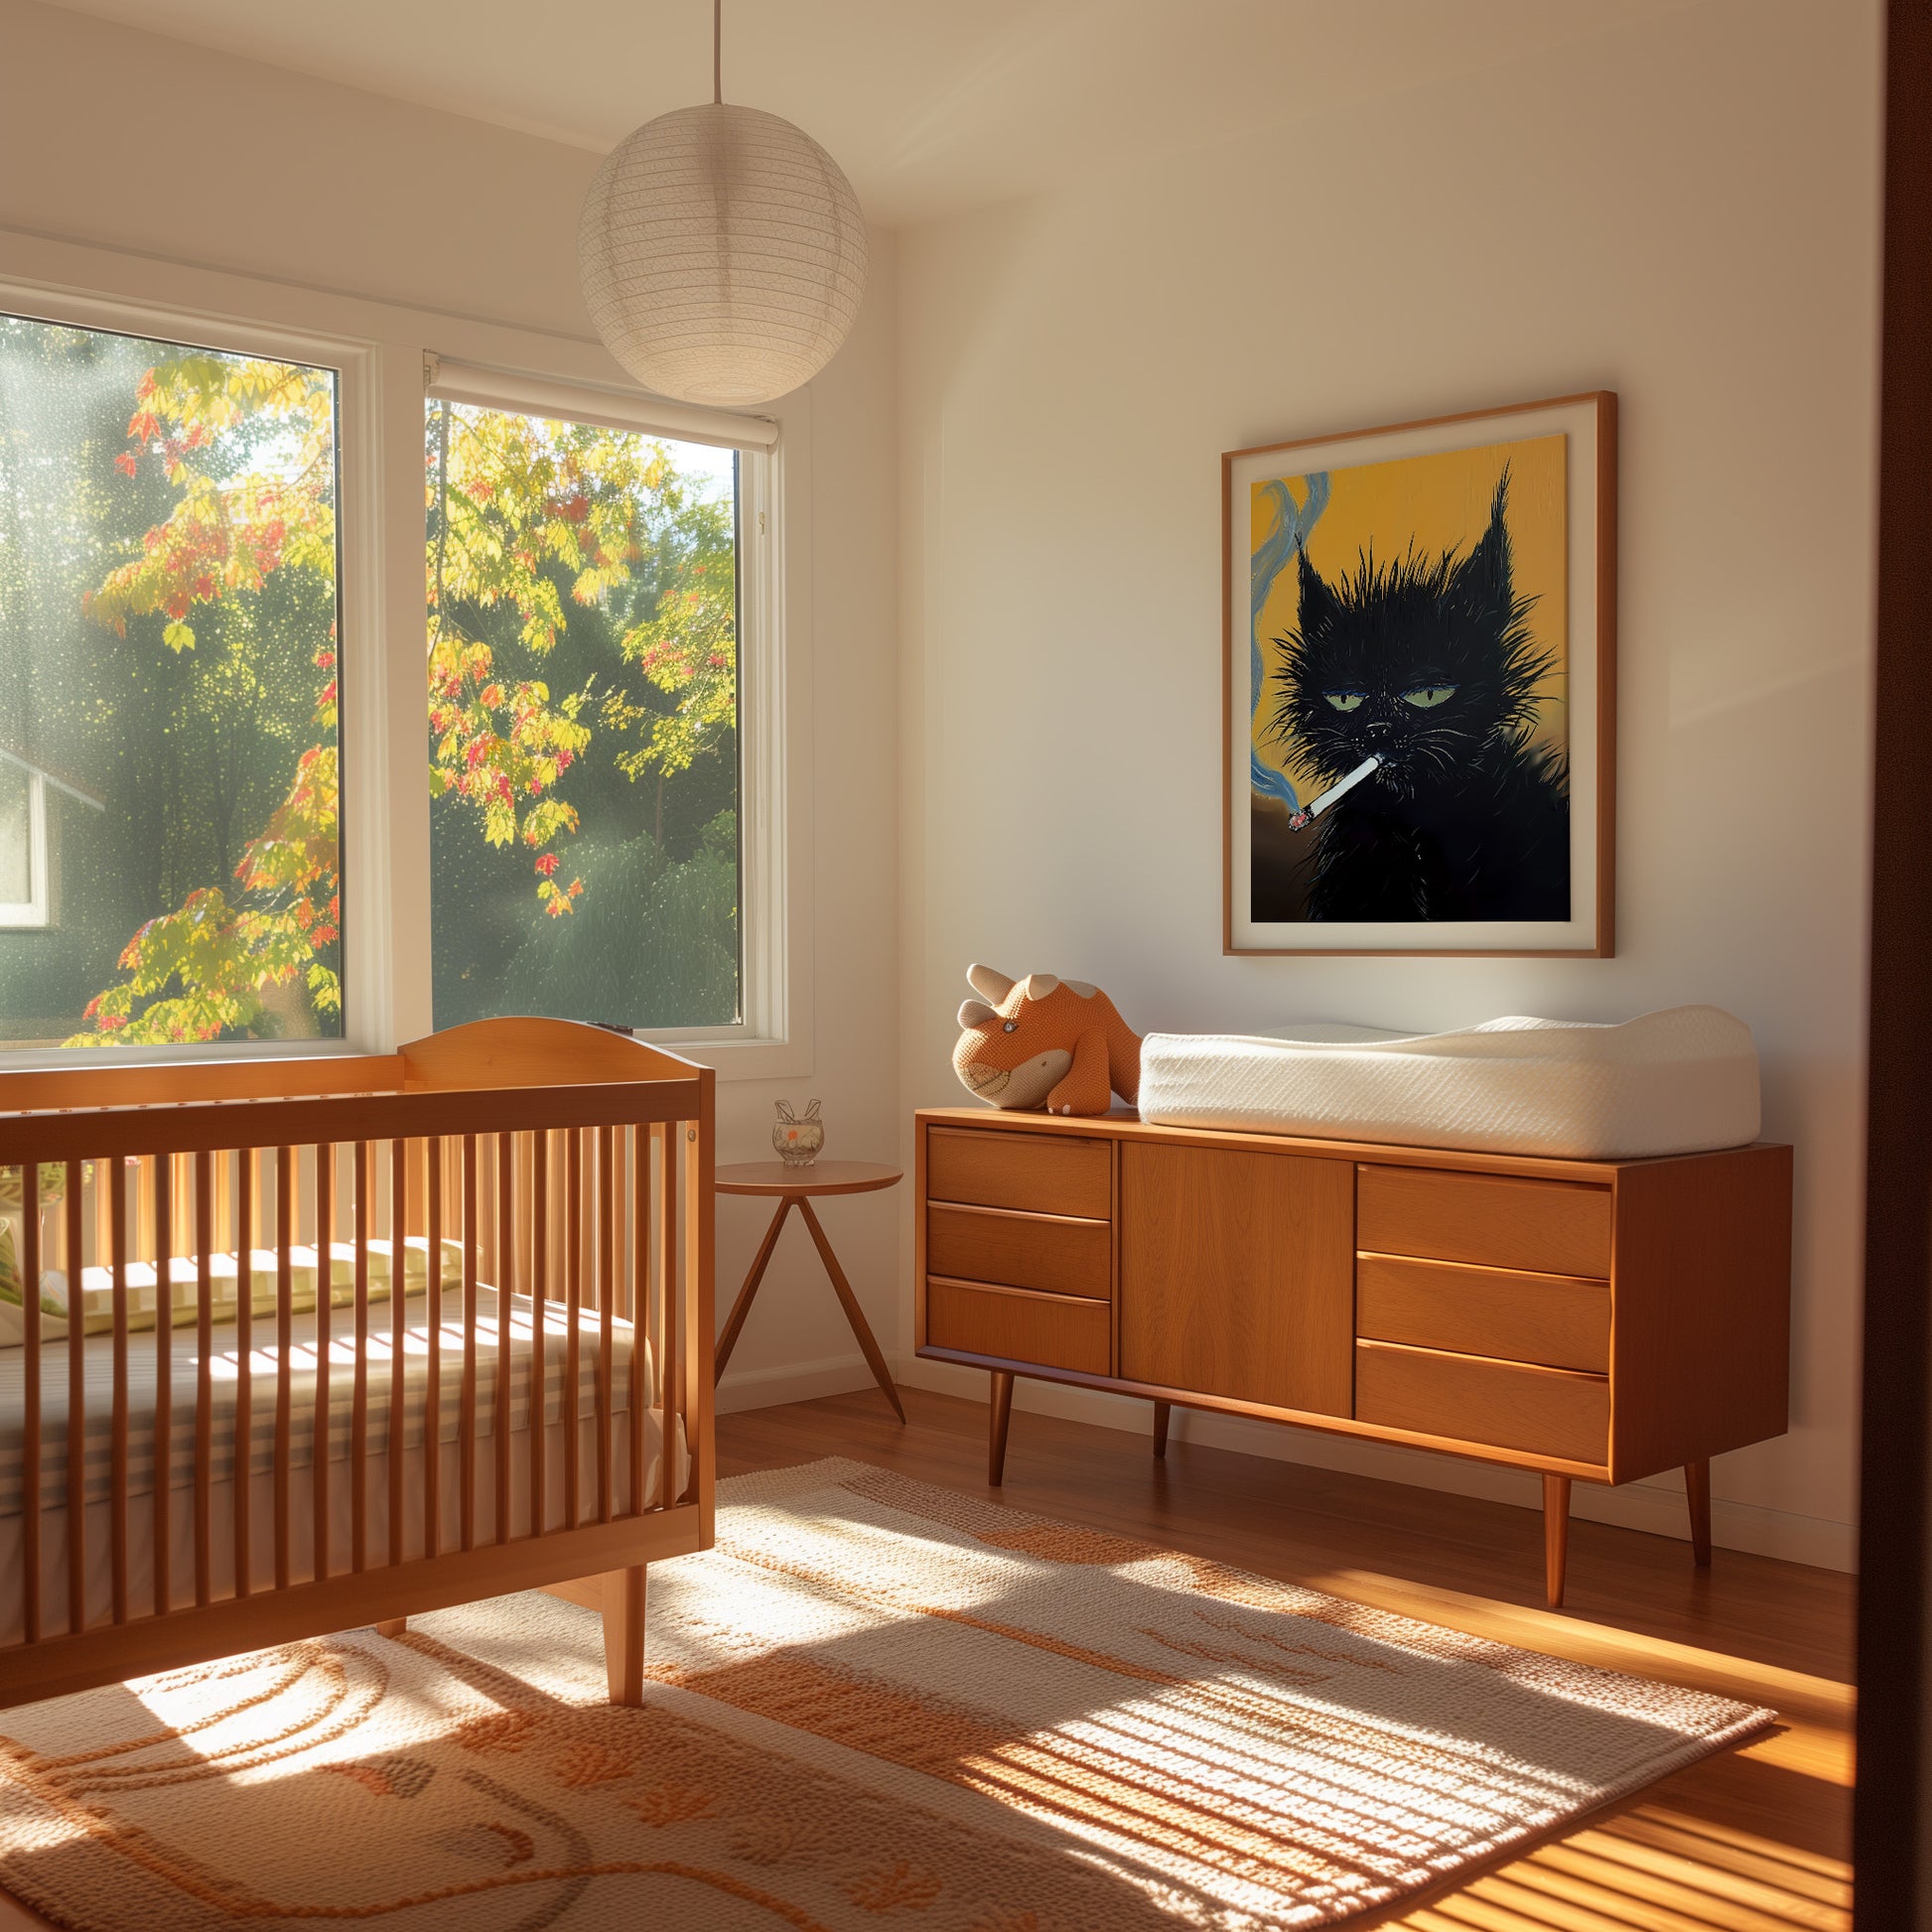 A cozy bedroom with a crib, mid-century dresser, and a whimsical cat painting.